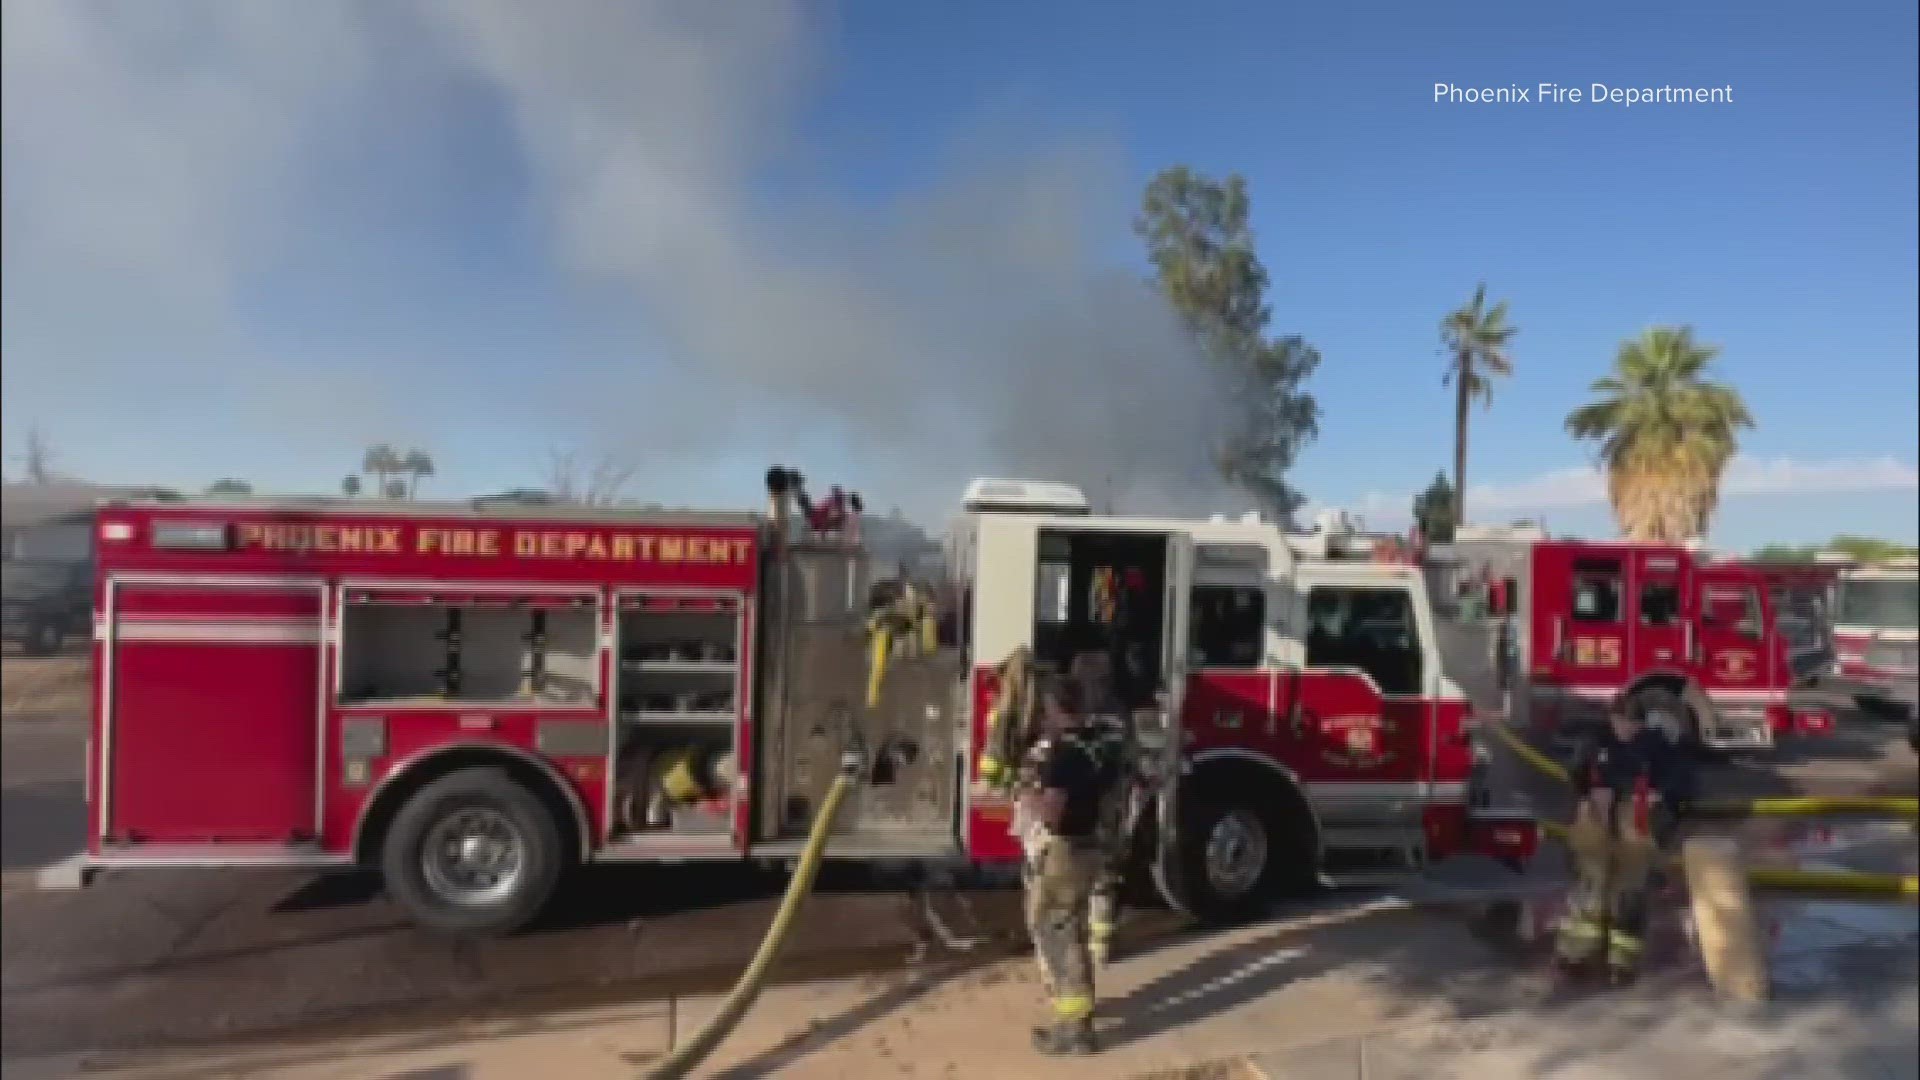 A spokesperson said the Phoenix Fire Department has responded to 27 fires since July 1.